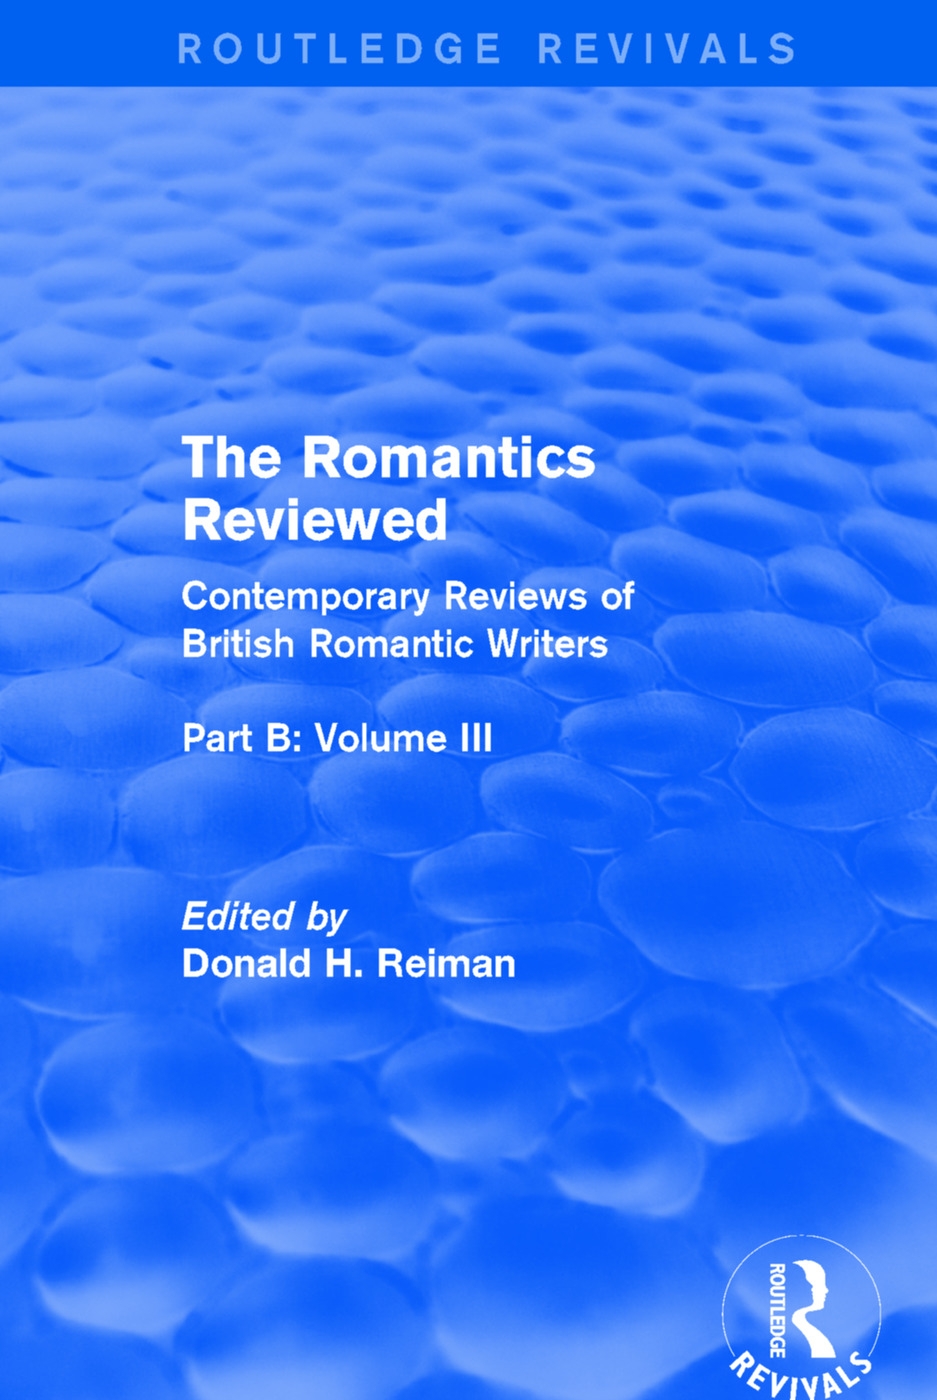 The Romantics Reviewed: Contemporary Reviews of British Romantic Writers. Part B: Byron and Regency Society Poets - Volume III